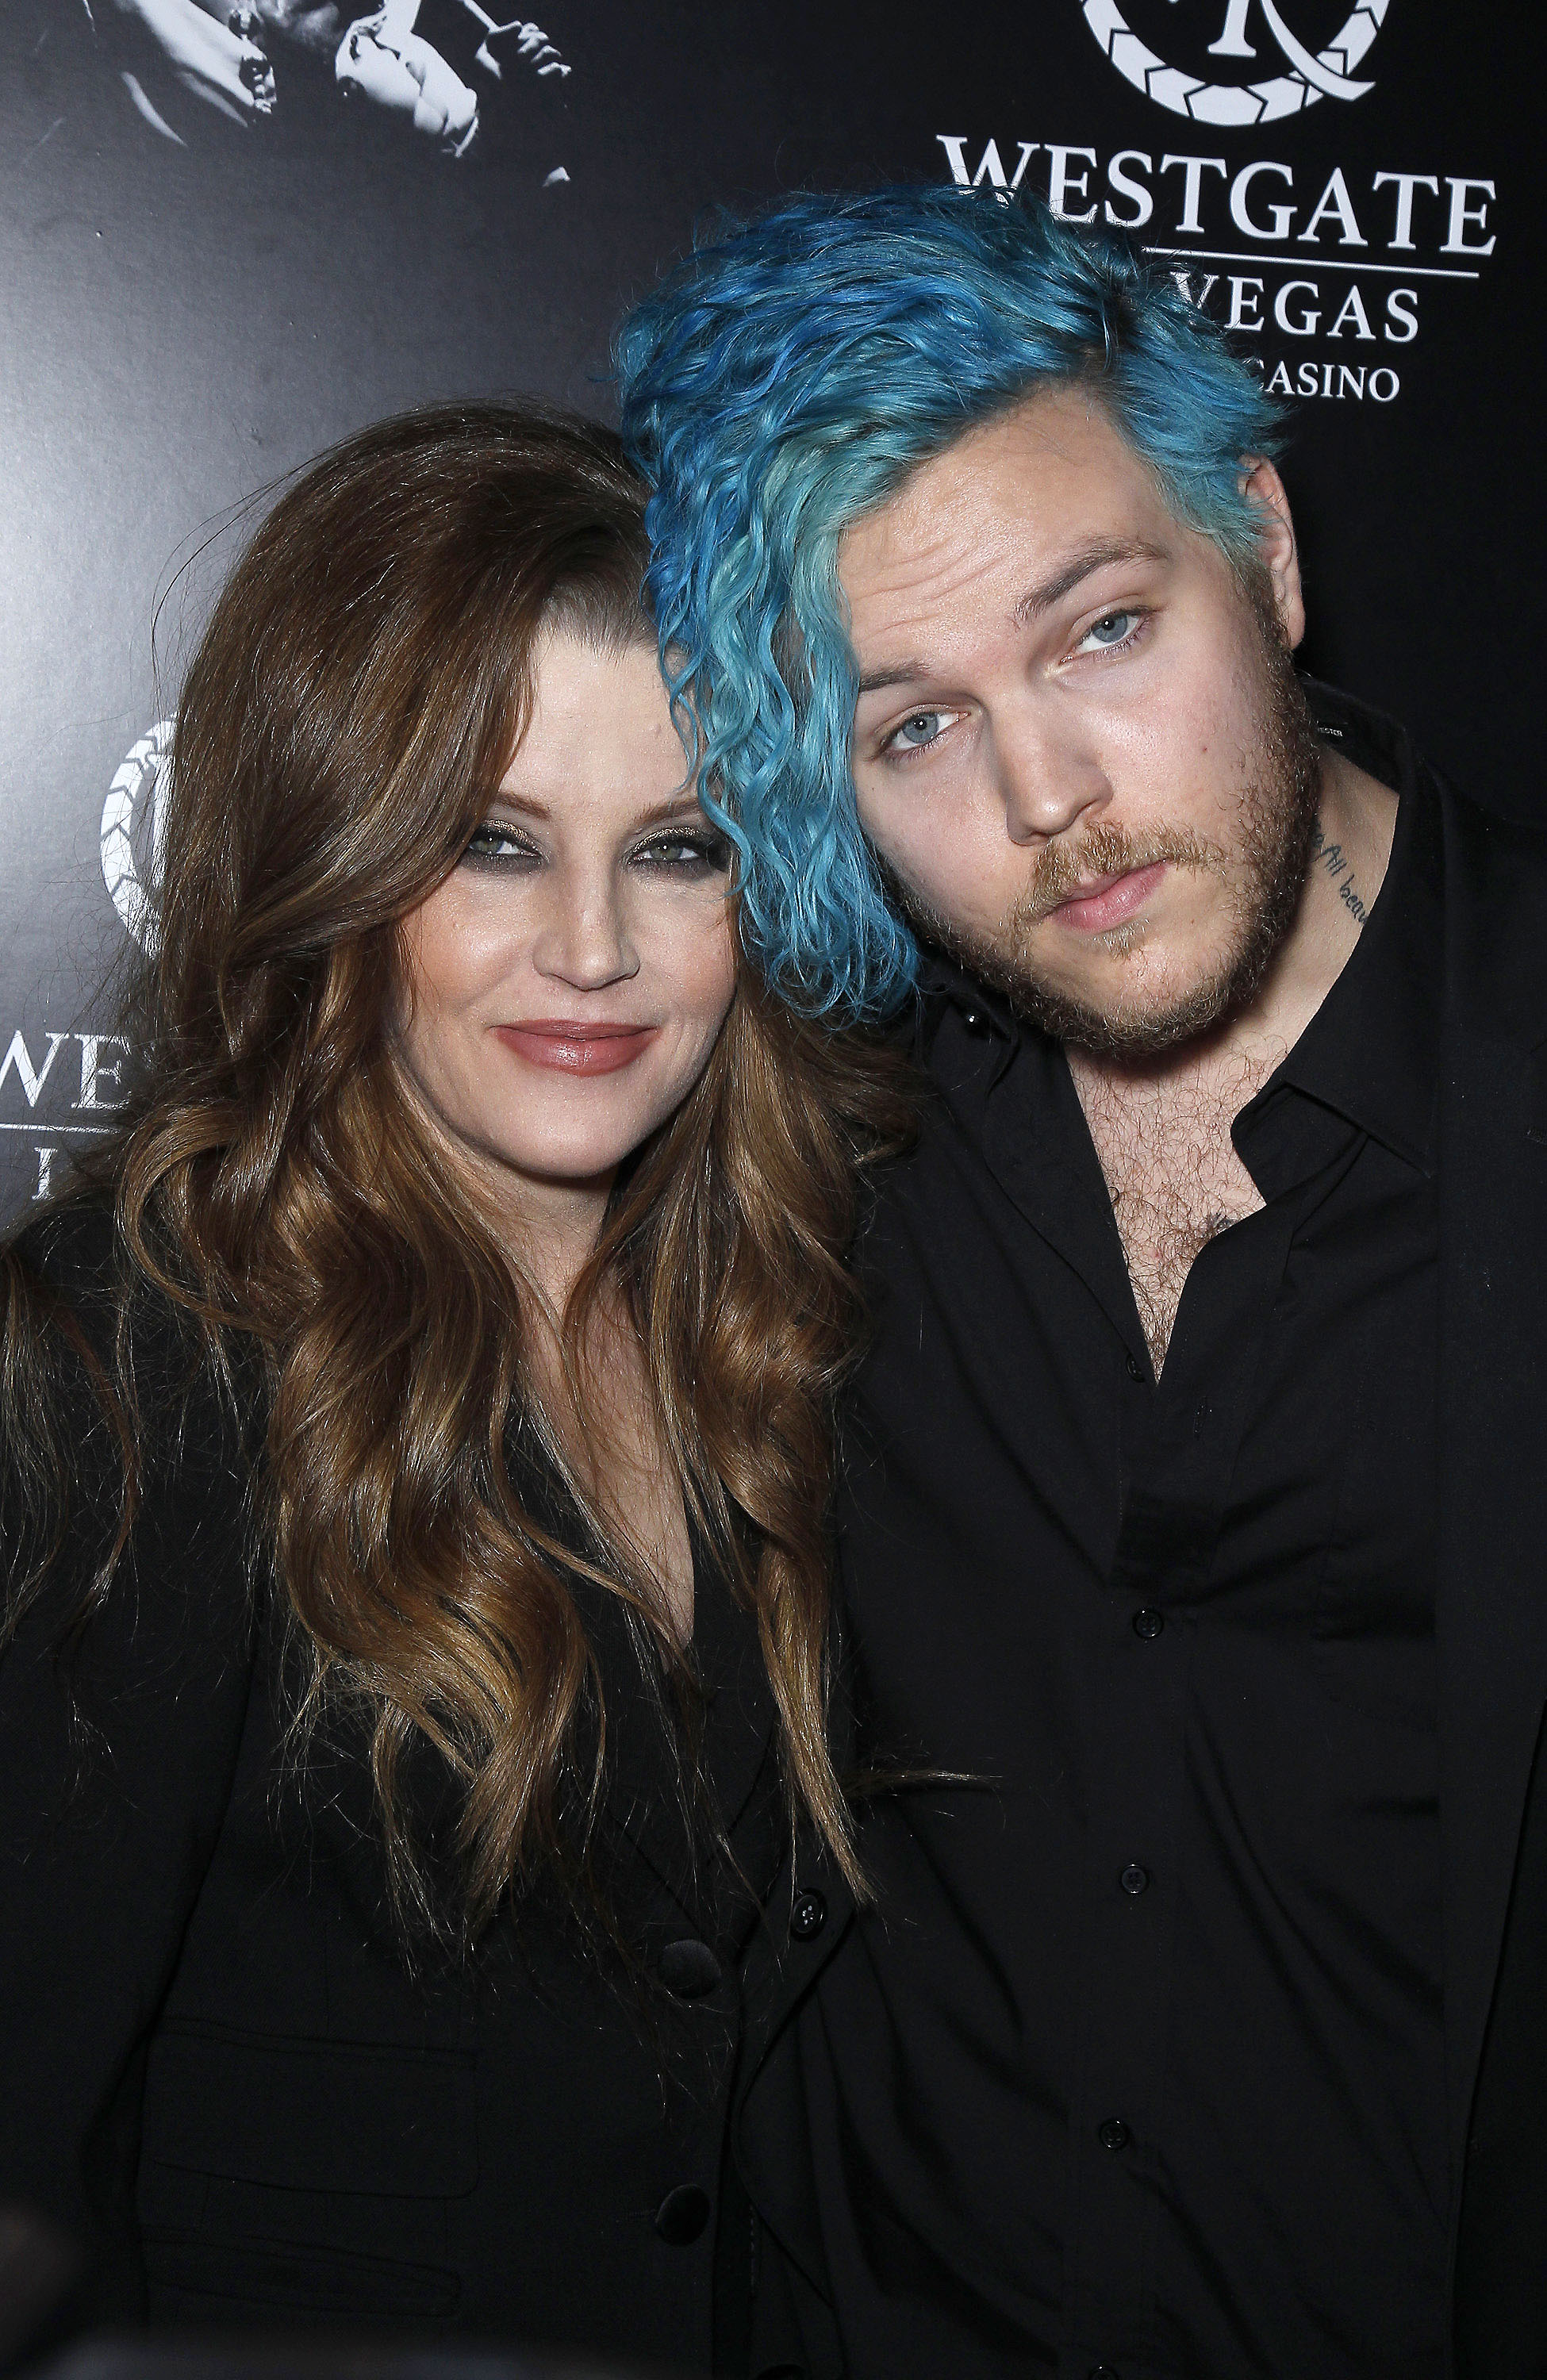 <p>Lisa Marie Presley's only son, Benjamin Keough — whose dad is her first husband, musician Danny Keough — <a href="https://www.wonderwall.com/news/new-details-emerge-about-benjamin-keoughs-scientology-upbringing-issues-with-drugs-and-alcohol-report-365915.article">died by suicide</a> on July 12, 2020. Benjamin — the grandson of Elvis Presley and Priscilla Presley — was 27. In August 2022, Lisa wrote a heartbreaking personal essay to mark National Grief Awareness Day and shared it with <a href="https://people.com/music/lisa-marie-presley-was-destroyed-by-son-benjamins-death-grief-essay/">People</a> magazine, revealing how she's coped, what she's learned and what advice she has for others who've experienced or know people who've faced similar tragedies. "My and my three daughters' lives as we knew it were completely detonated and destroyed by his death. We live in this every. Single. Day," Lisa Marie wrote in part. "I've dealt with death, grief and loss since the age of 9 years old. I've had more than anyone's fair share of it in my lifetime and somehow, I've made it this far. But this one, the death of my beautiful, beautiful son? The sweetest and most incredible being that I have ever had the privilege of knowing, who made me feel so honored every single day to be his mother? Who was so much like his grandfather on so many levels that he actually scared me? Which made me worry about him even more than I naturally would have? No. Just no ... no no no no ..." she wrote, adding, "It's a real choice to keep going, one that I have to make every single day and one that is constantly challenging to say the least ... But I keep going for my girls."</p>